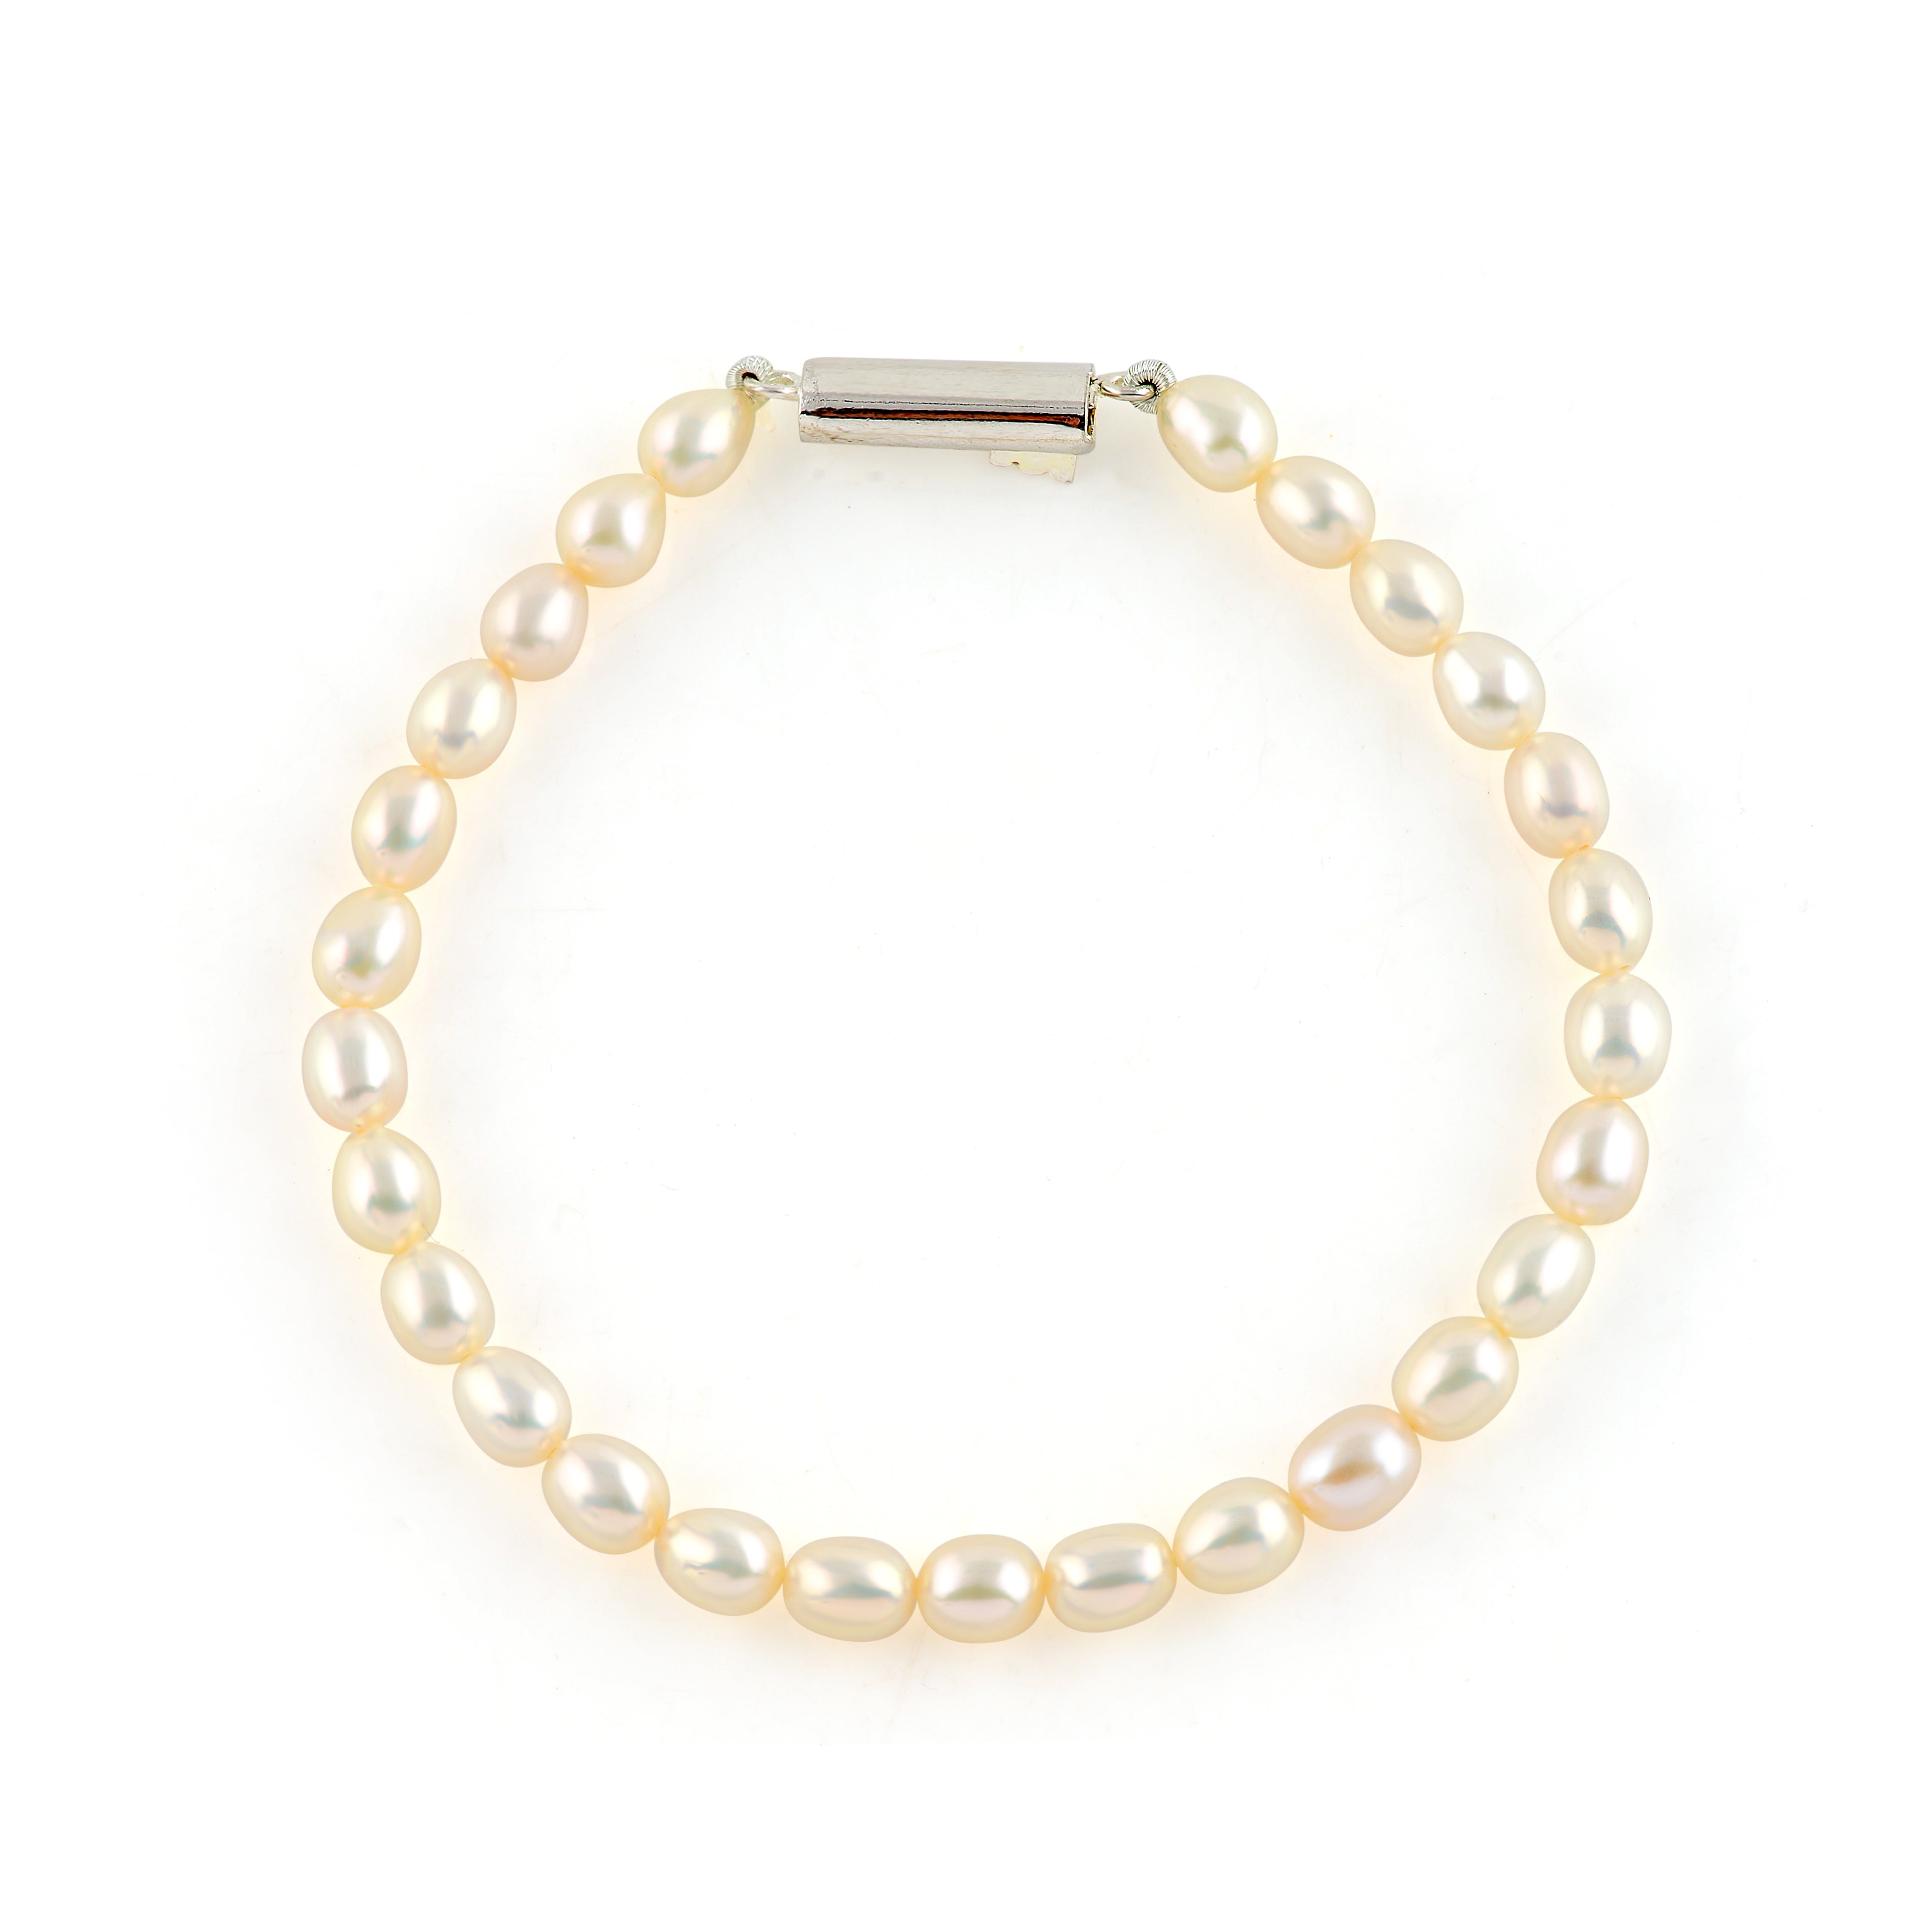 White freshwater pearl bracelet with a silver clasp